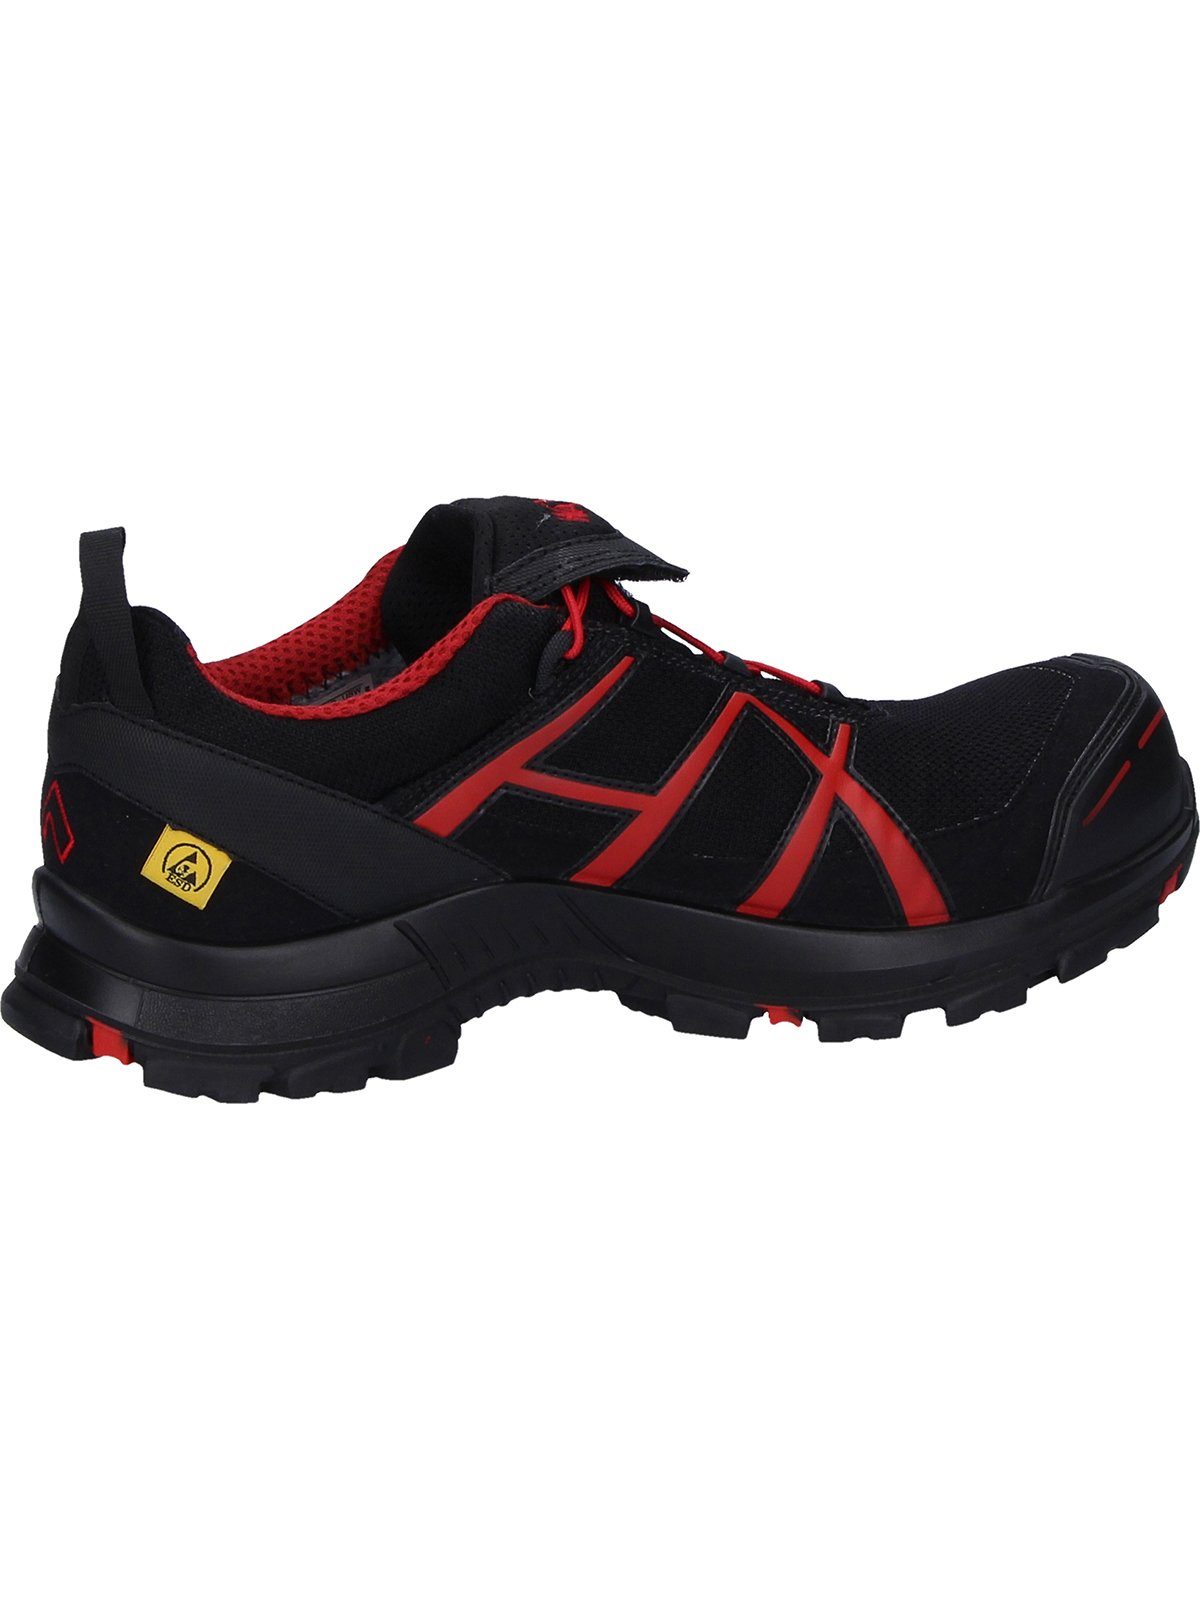 Black haix Eagle Arbeitsschuh low black/red Safety 40.1